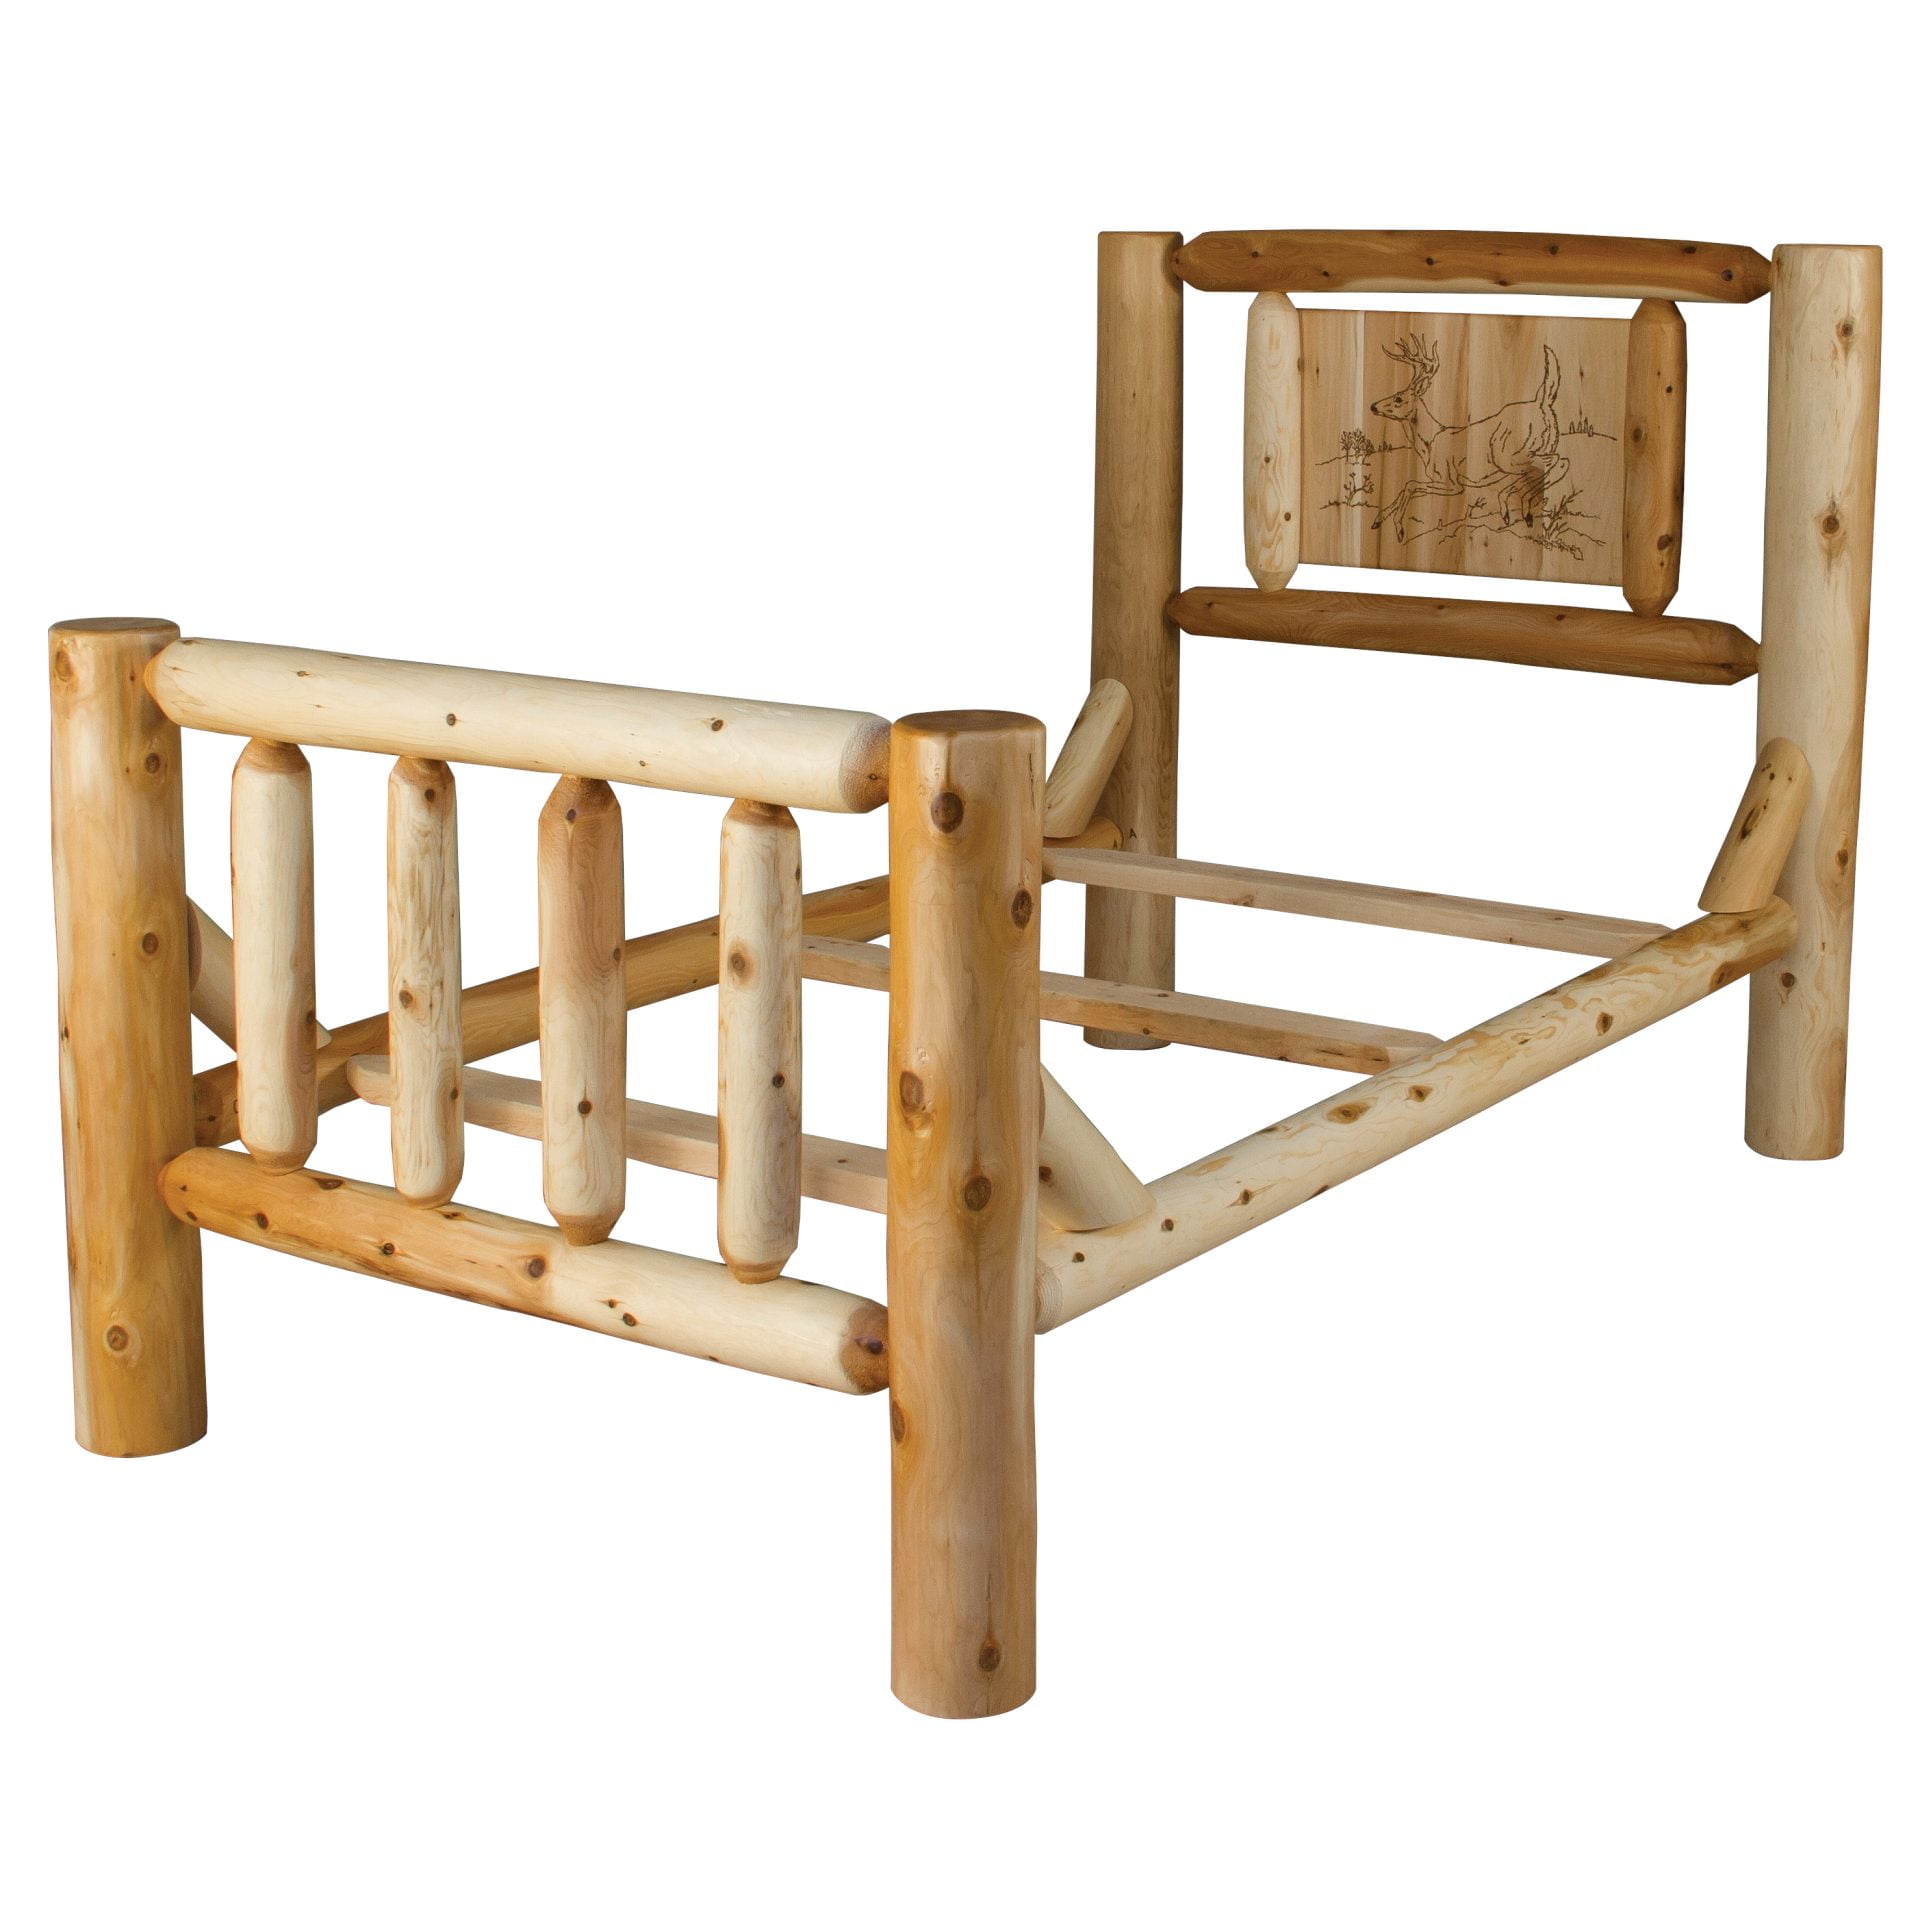 Rustic White Cedar Log Mission Style Bed with Deer Artwork